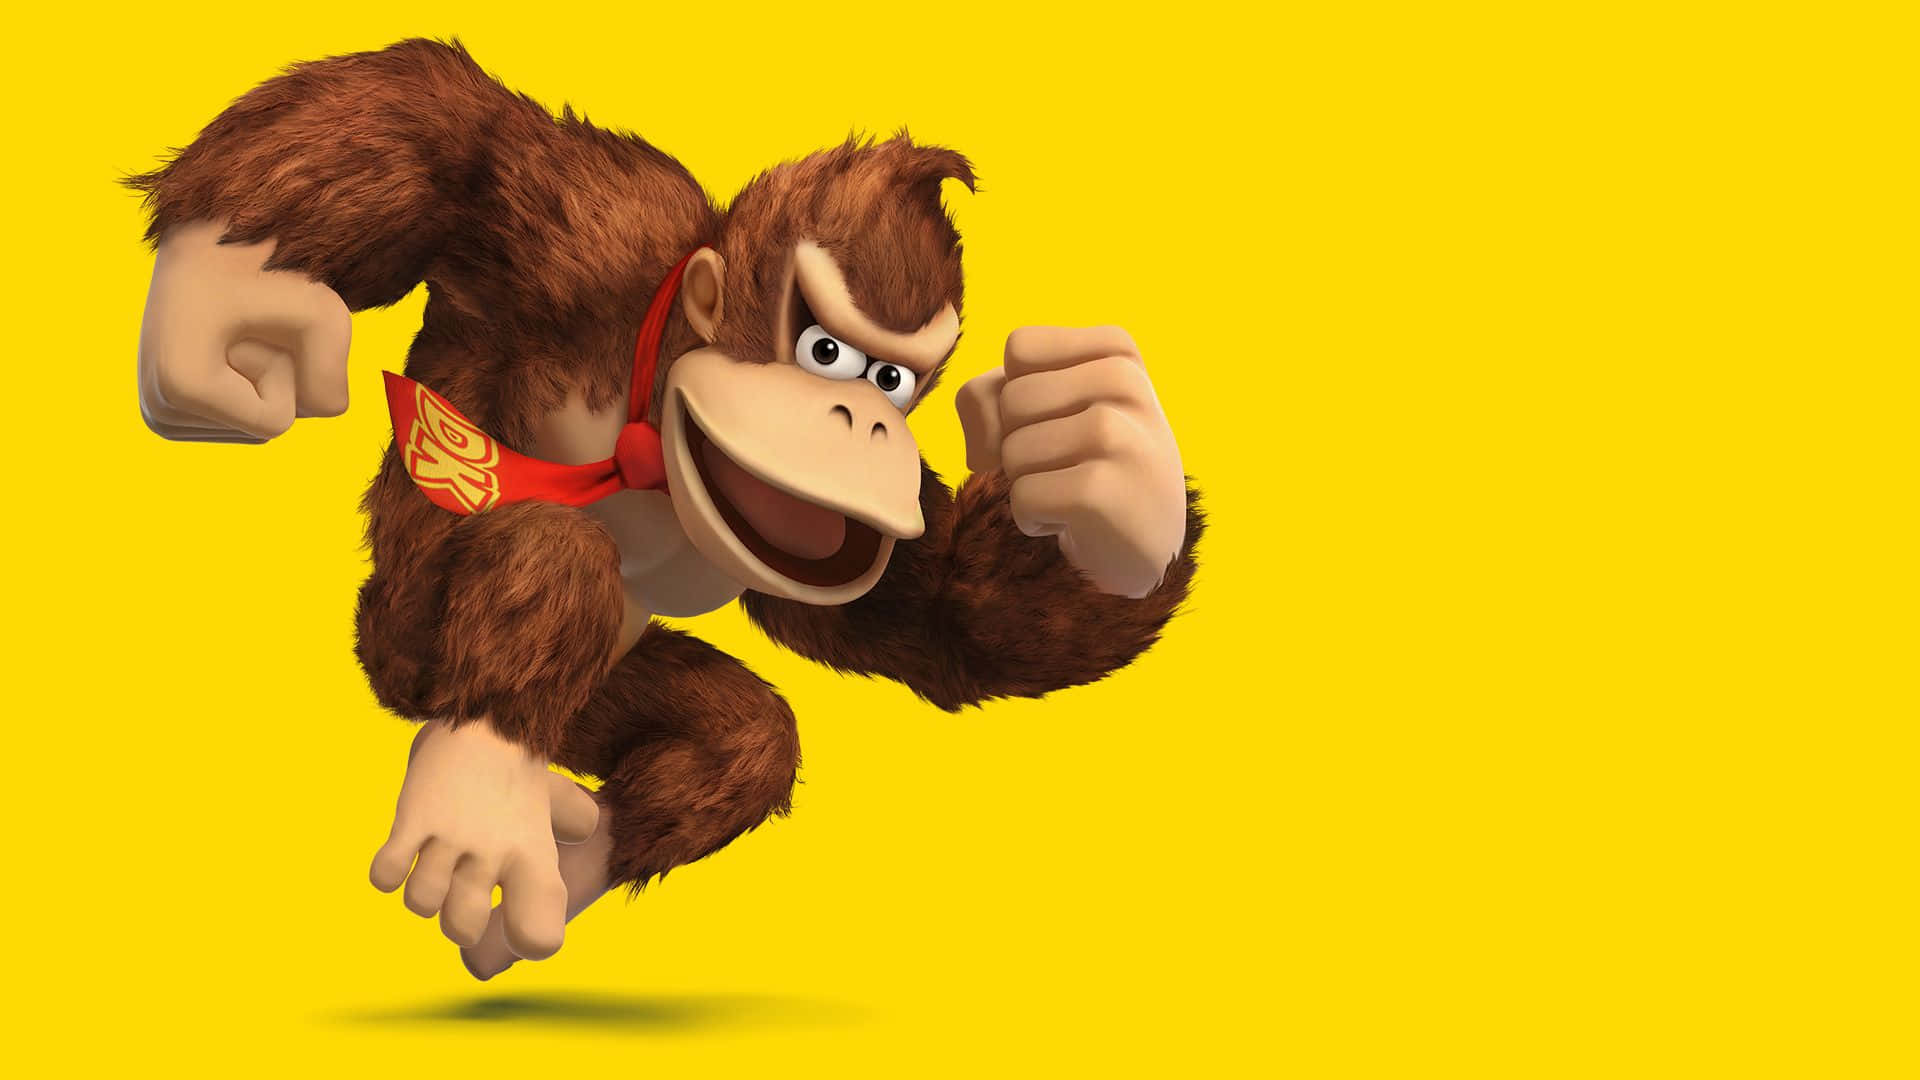 Donkey Kong In Action With A Barrel